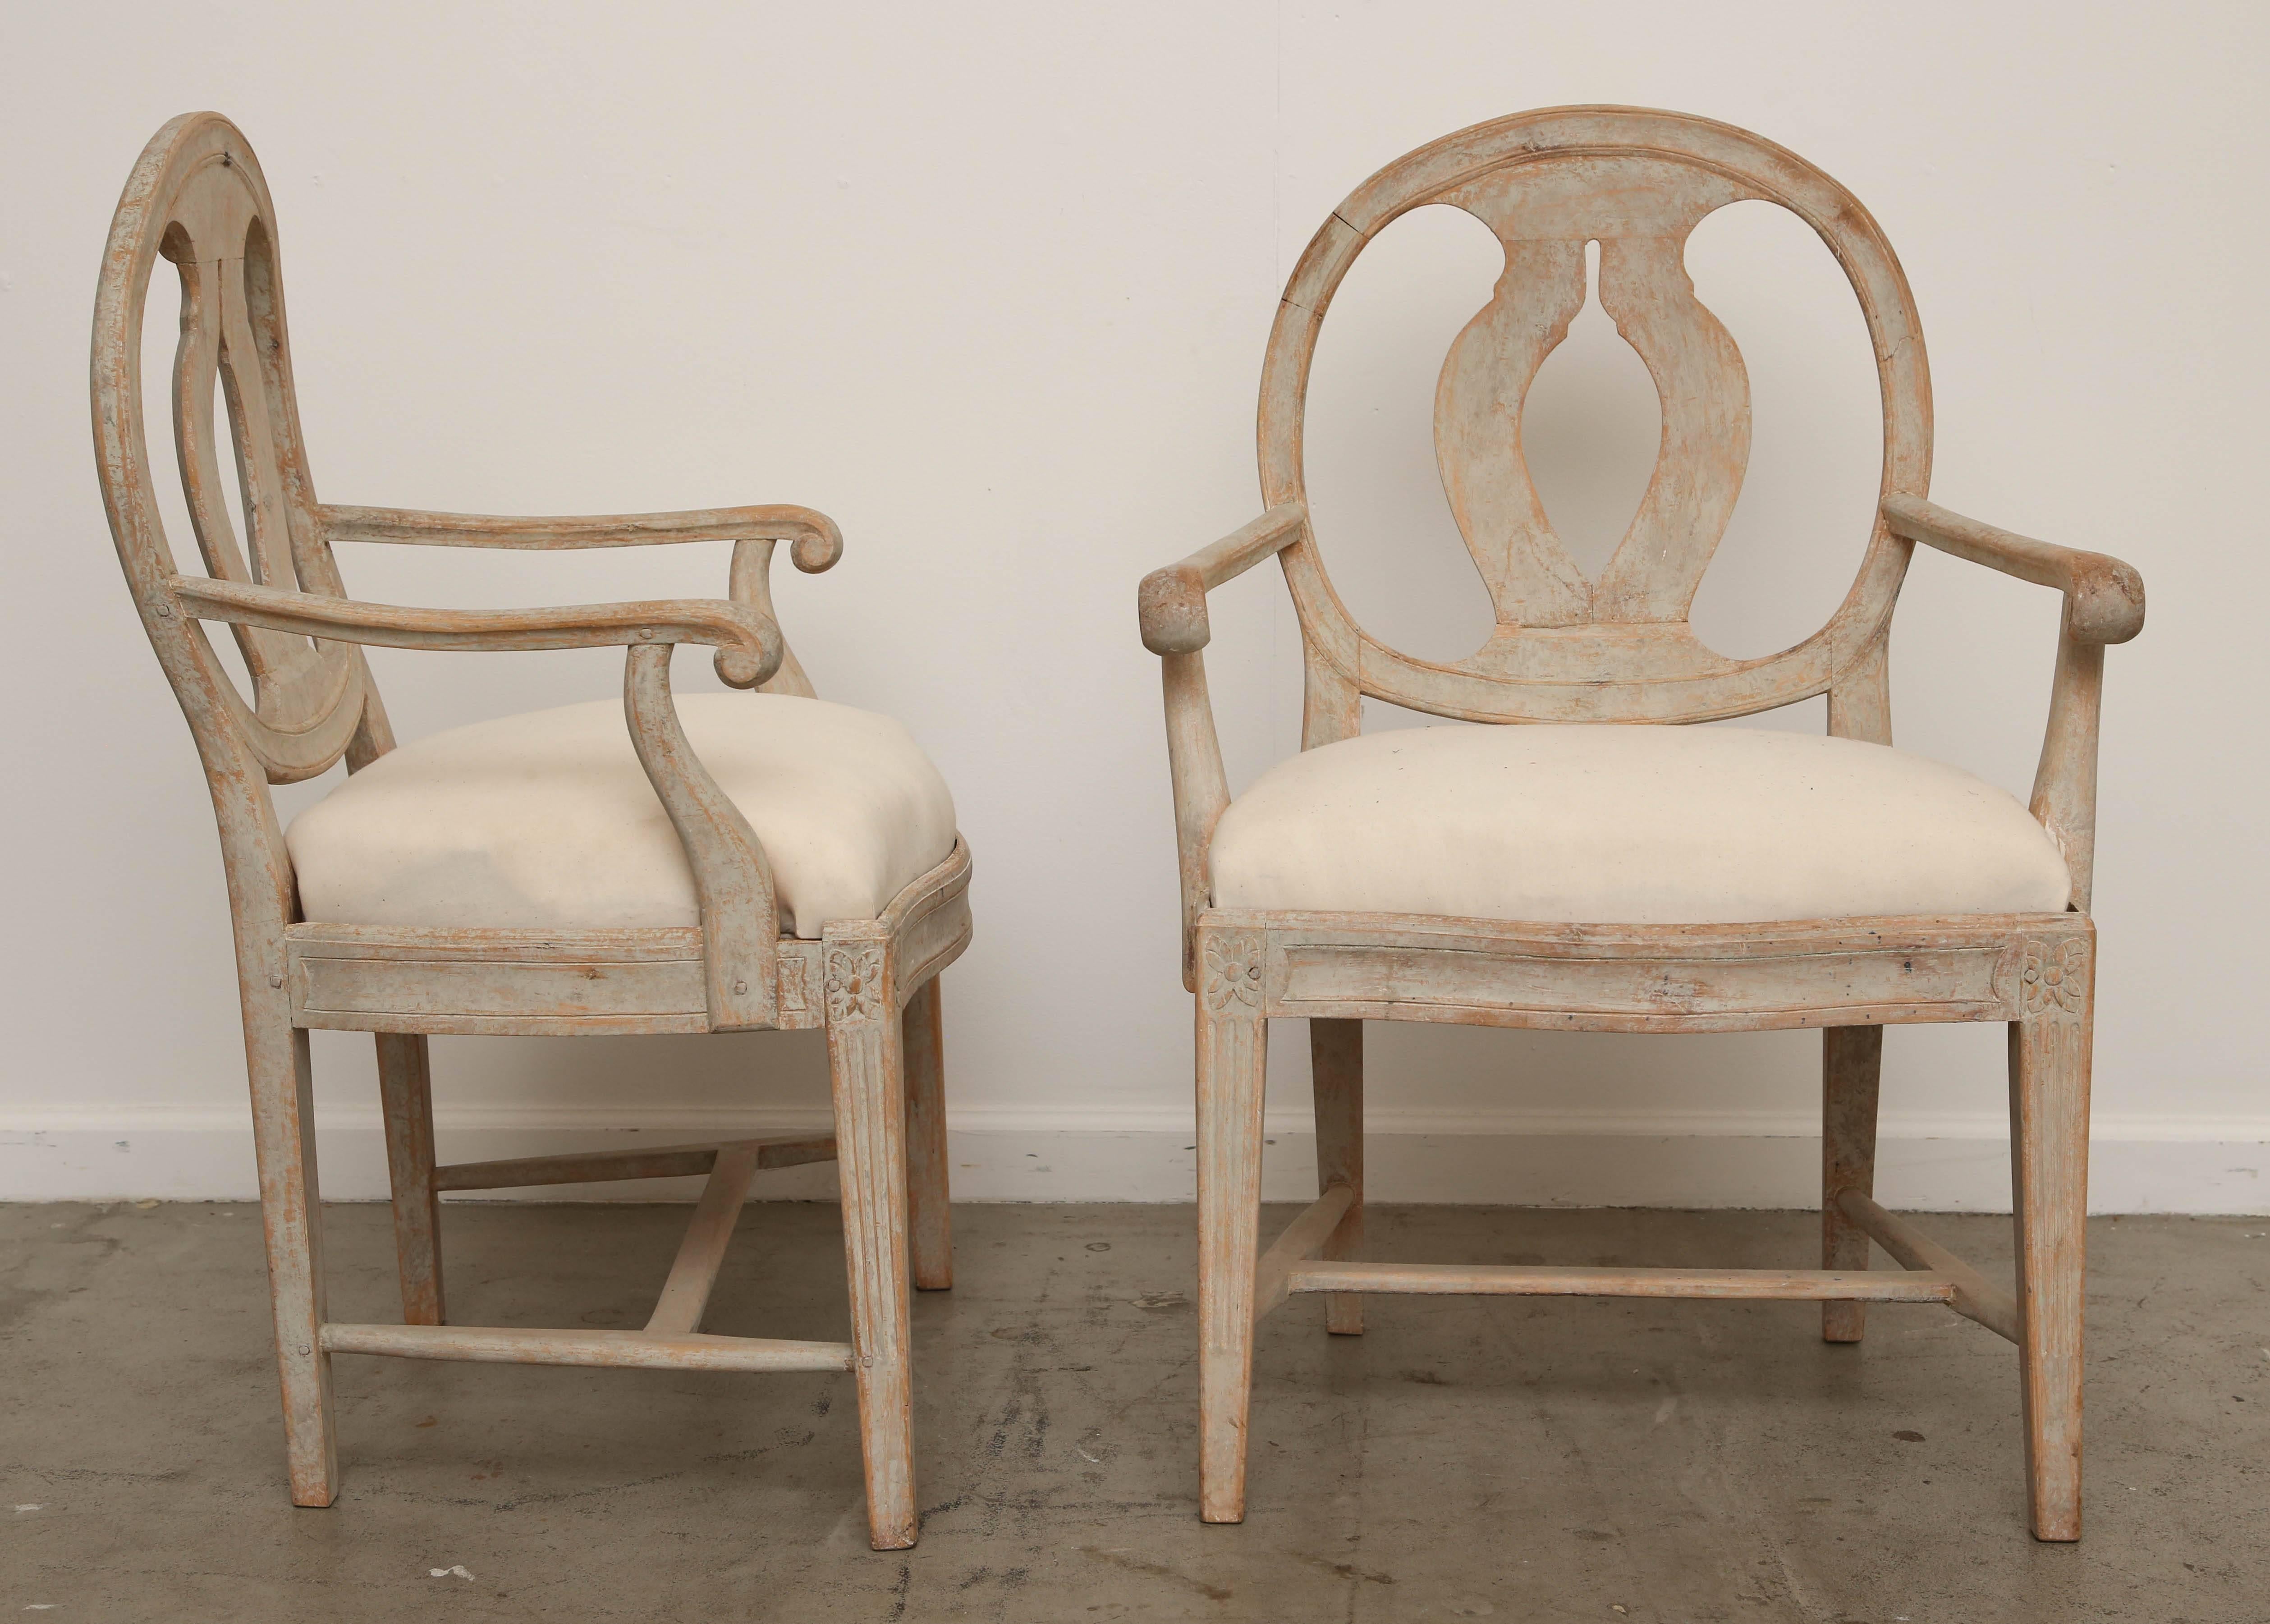 Pair of Antique Swedish late Gustavian armchairs, Classic urn-shaped curved
back splat. Curved and scrolled arms, top corner of legs have carved rosettes,
square fluted legs with cross stretchers. Dry scraped down to original paint
Mid-19th